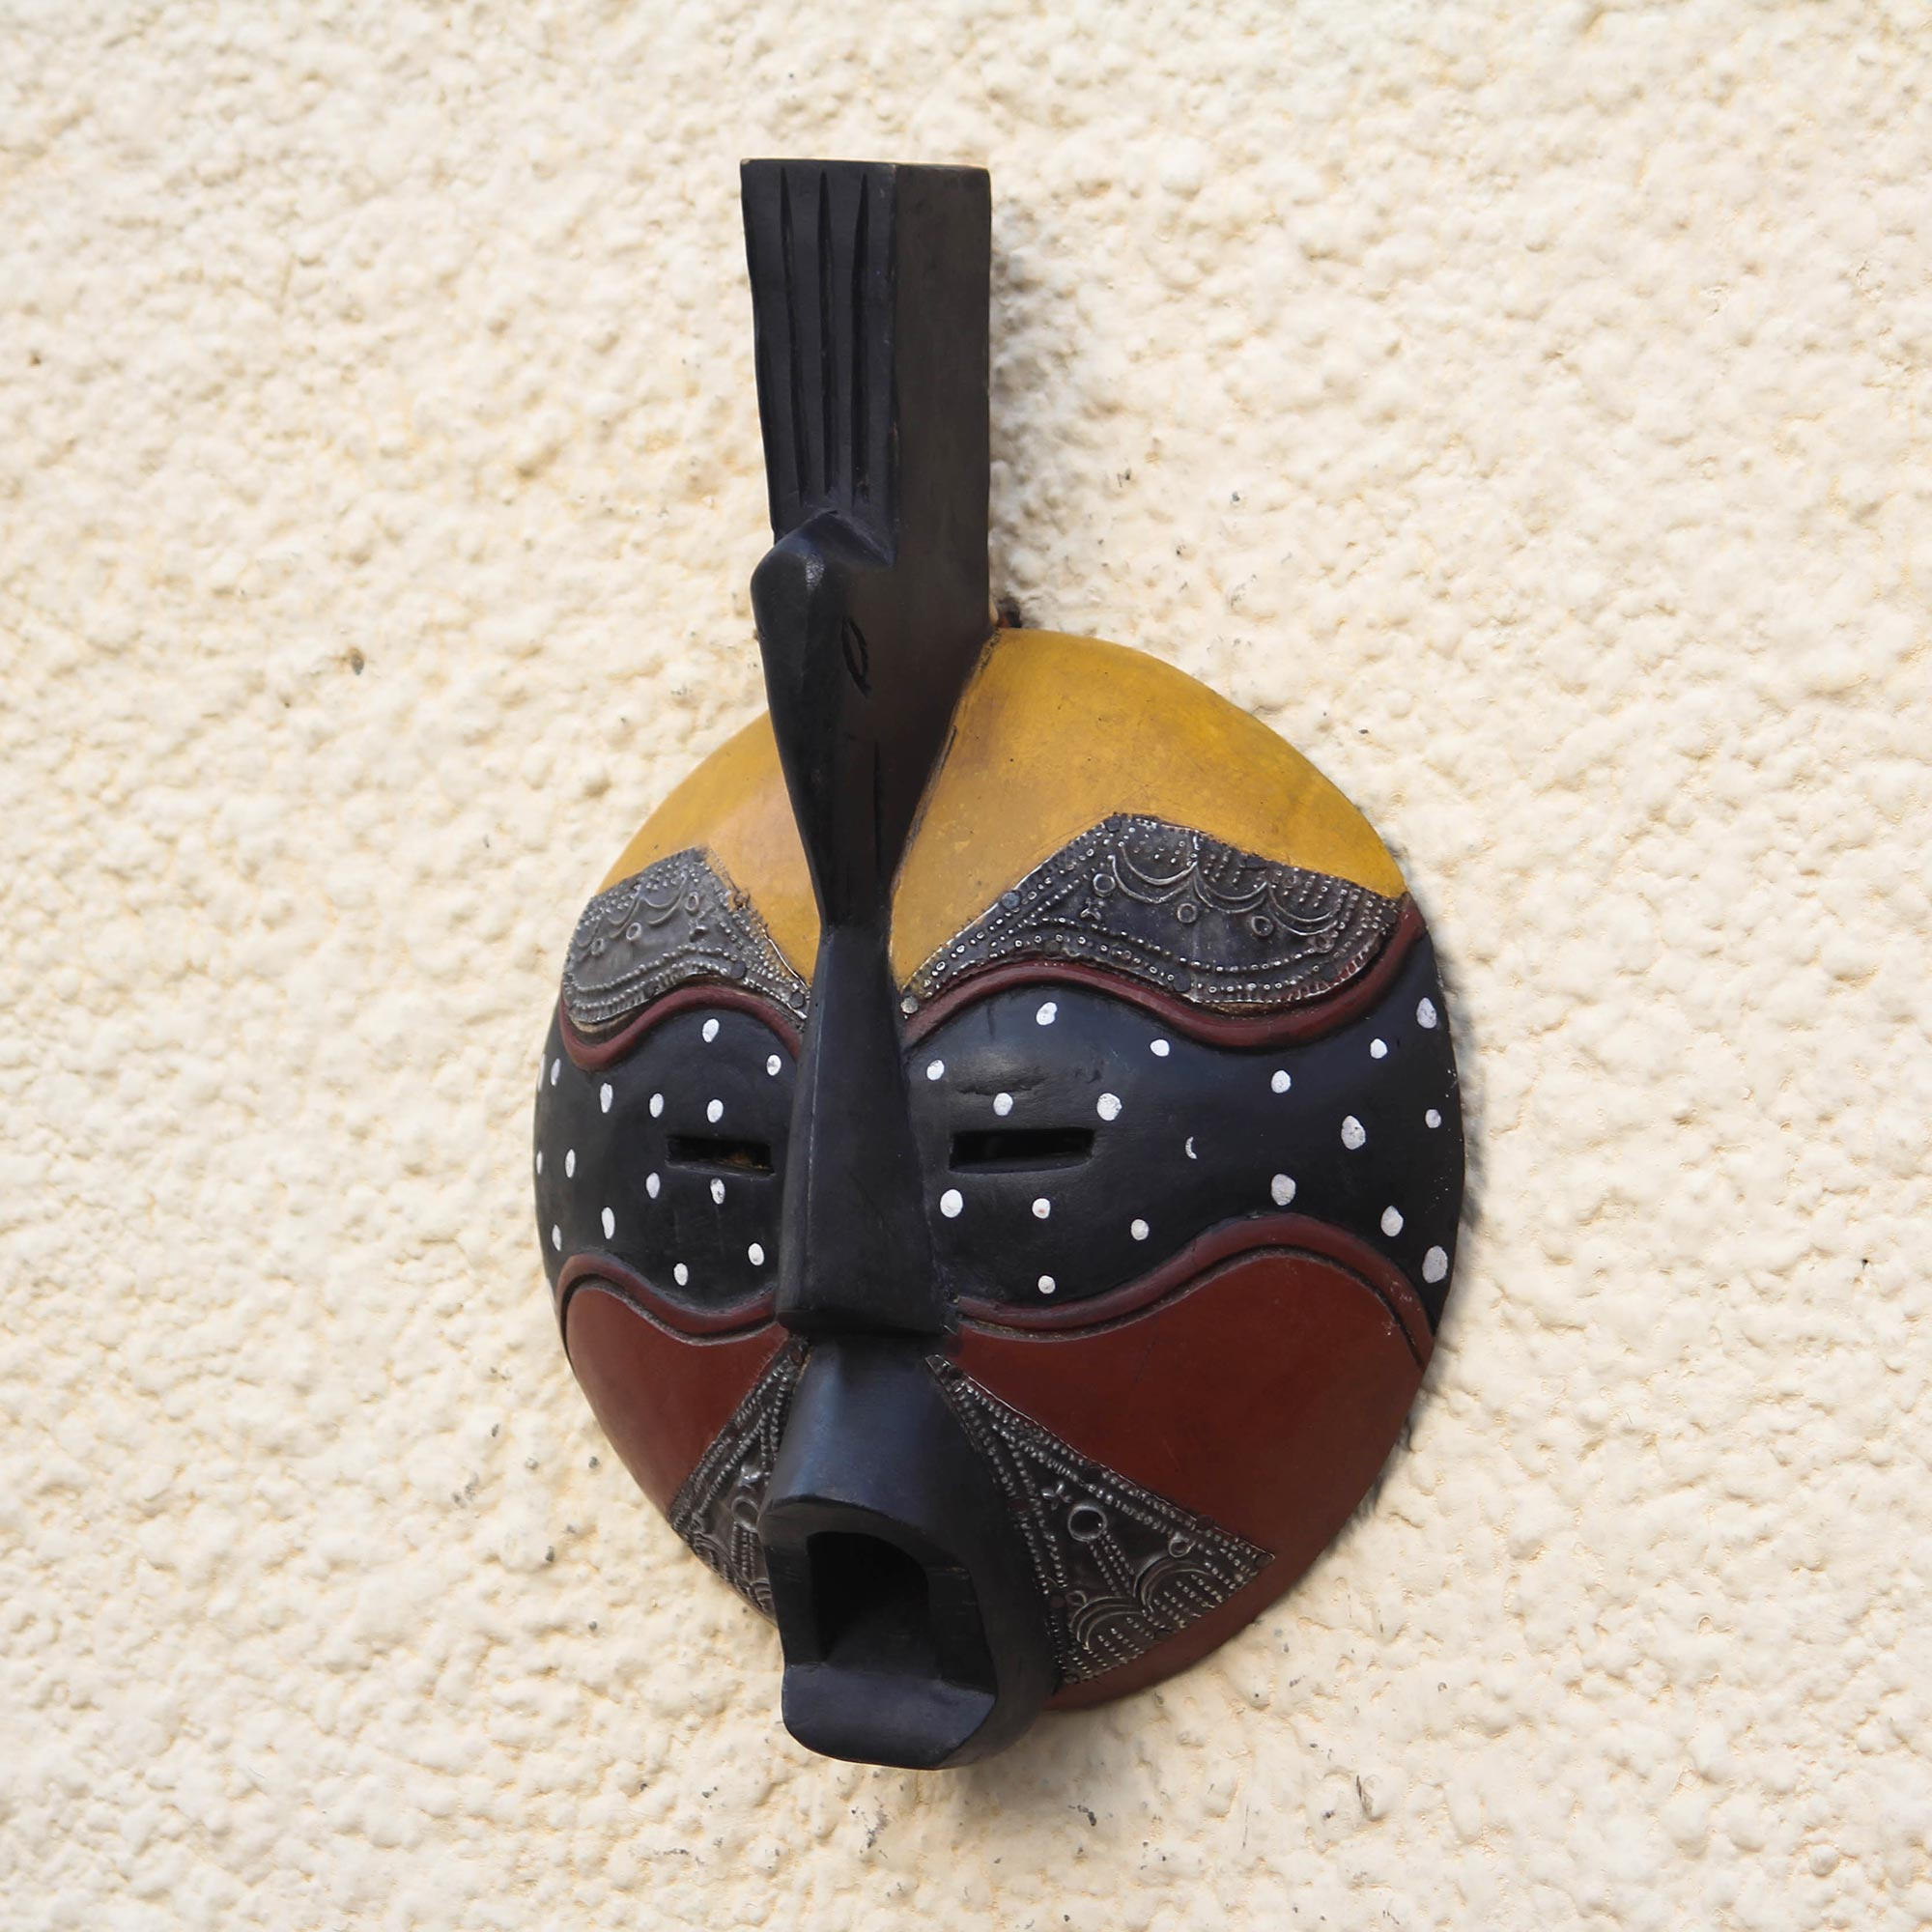 UNICEF Market | West African Akan Handcrafted Mask - Tribal Serenity Mask